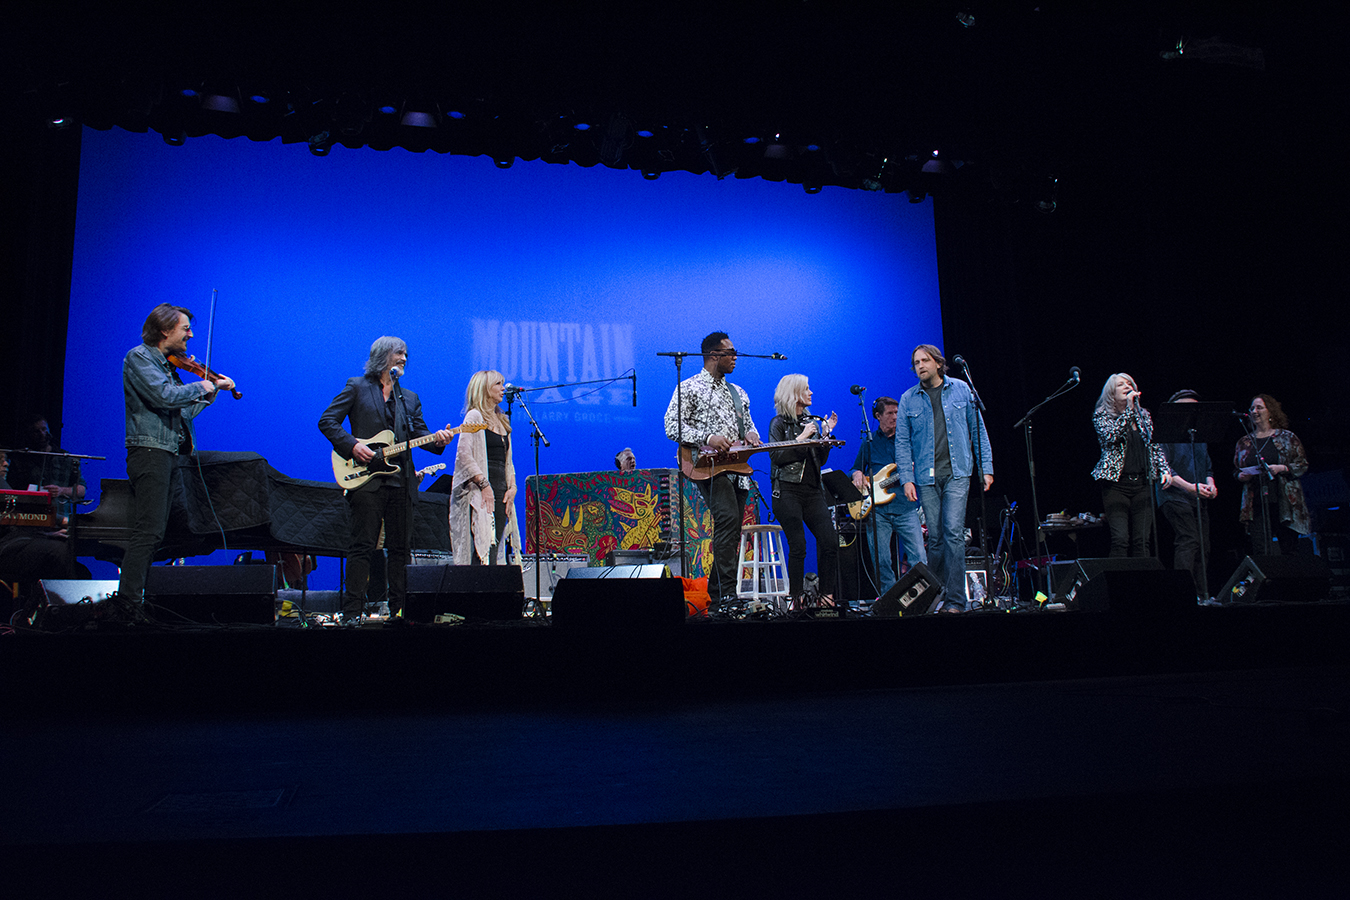 Eight people, musicians stand side by side on the Mountain Stage.